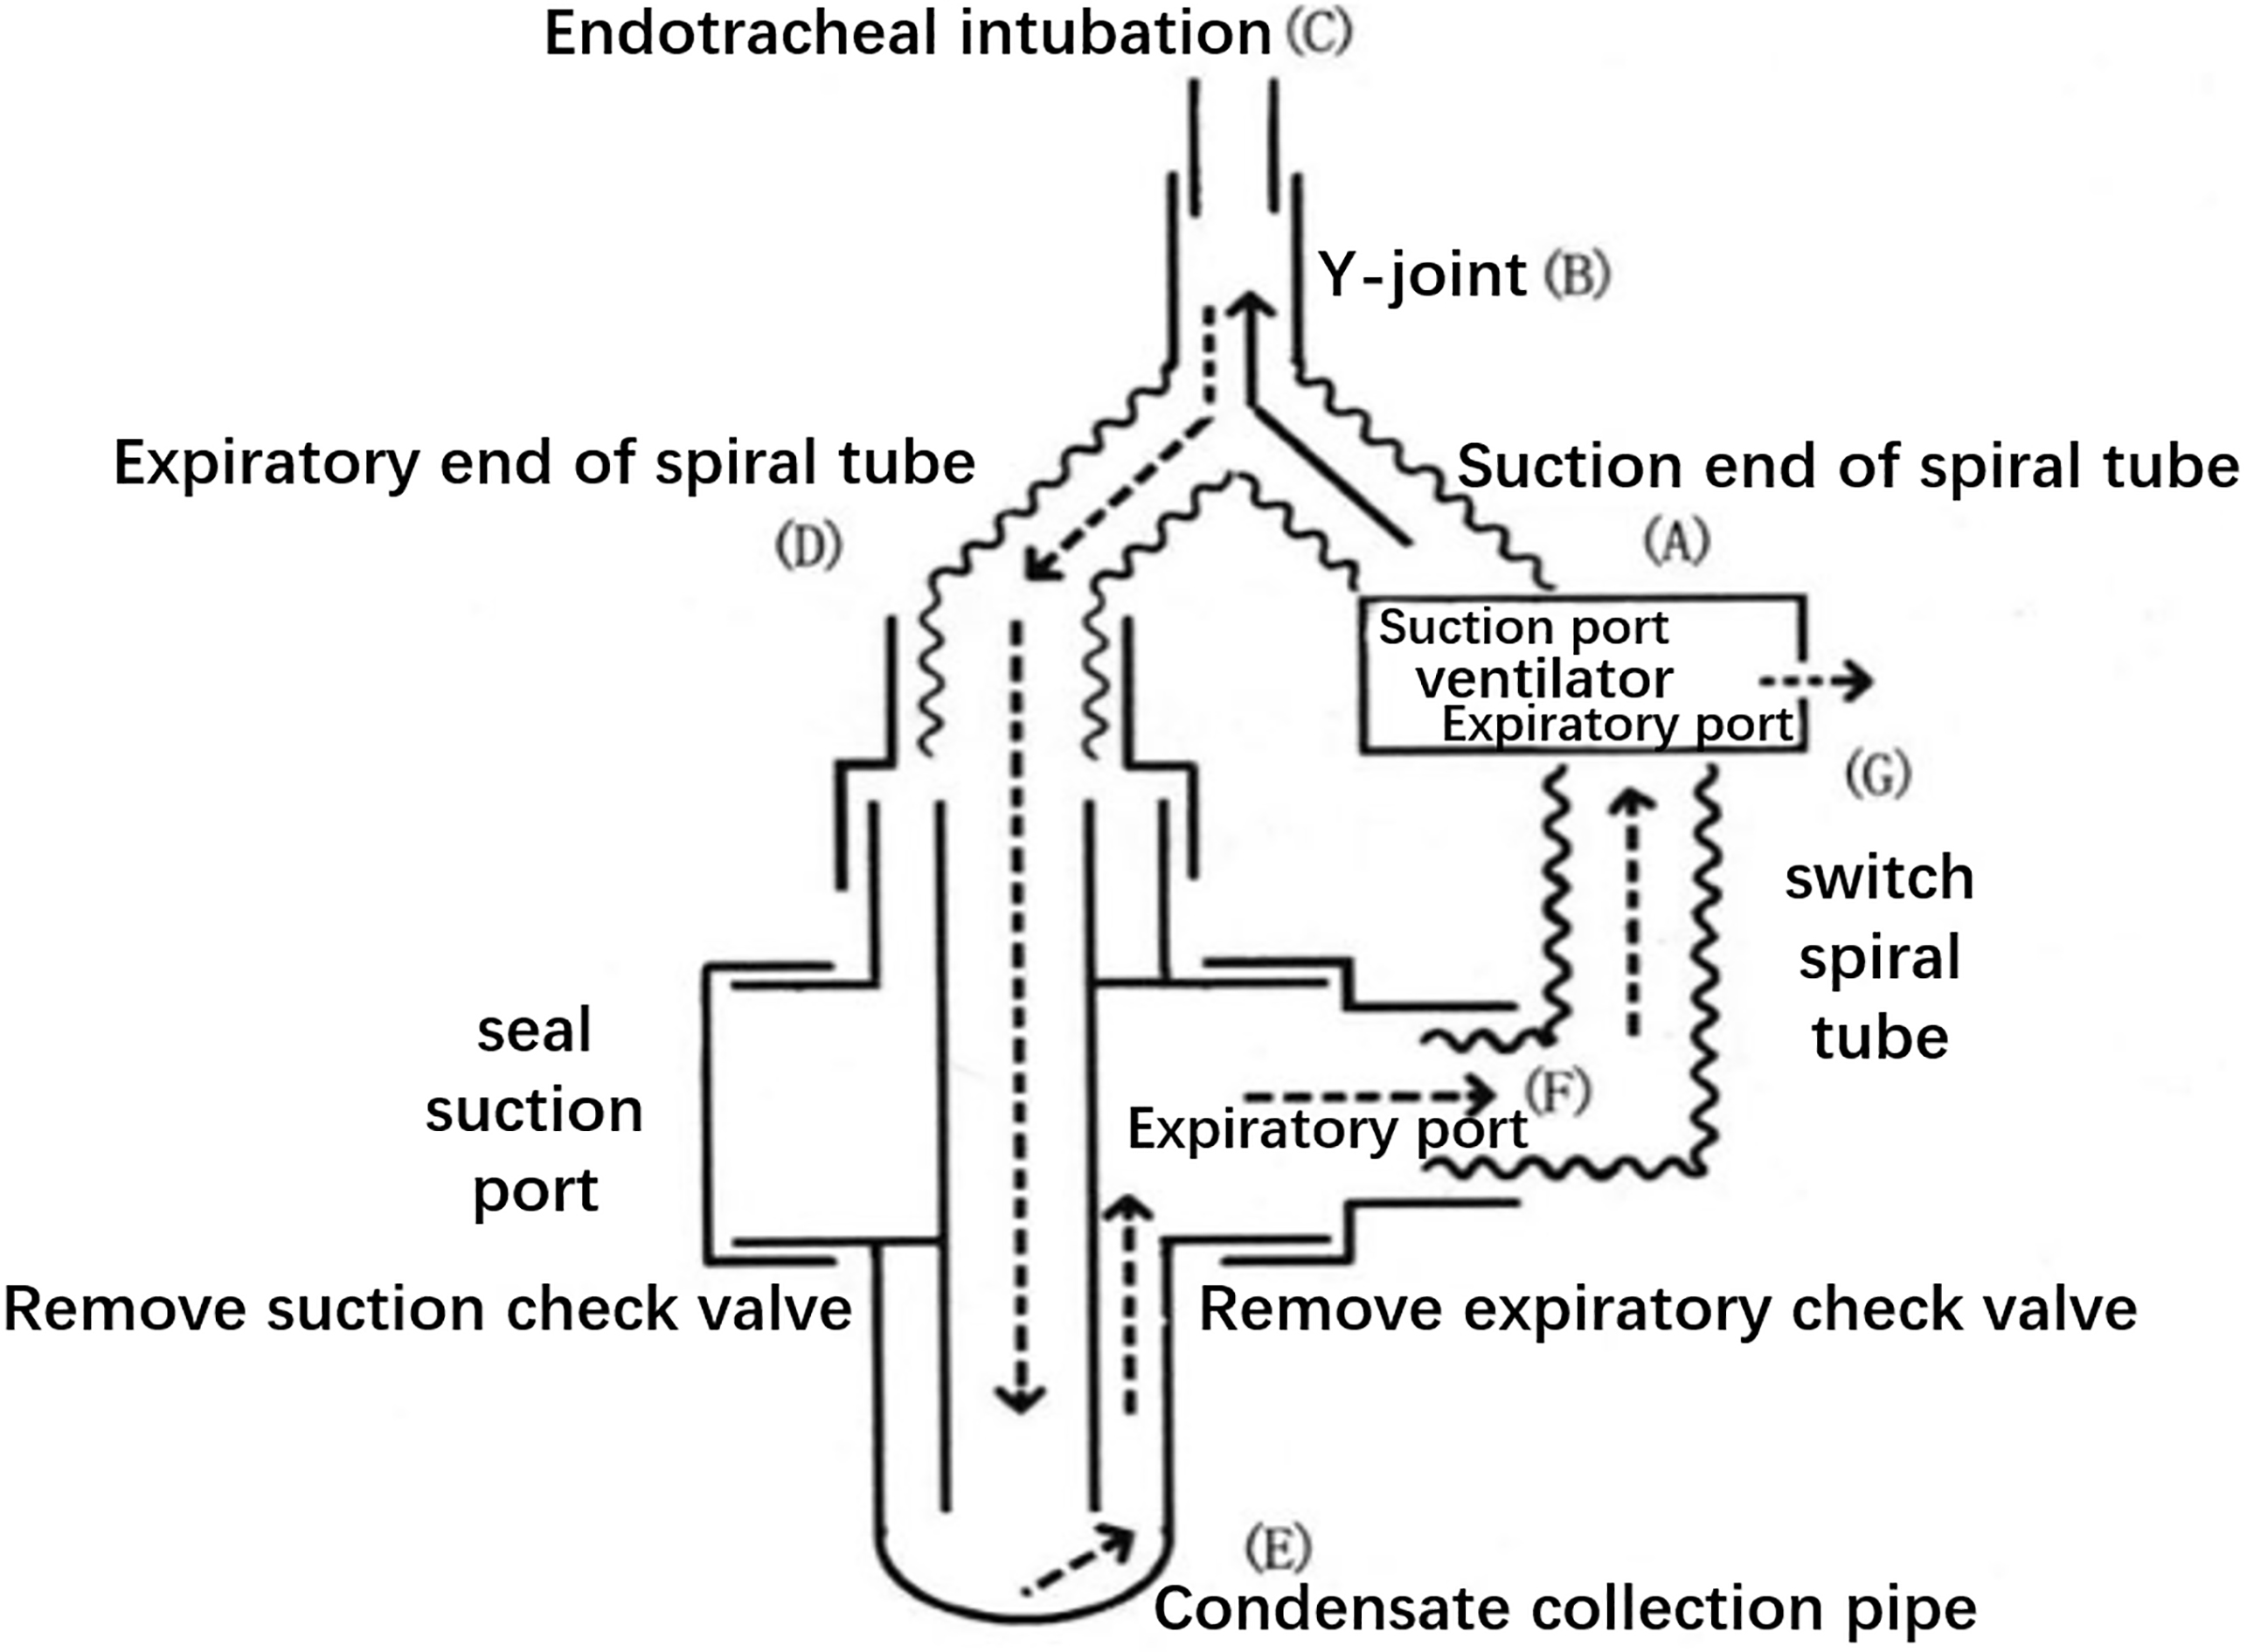 Schematic diagram of the connection between the modified condenser and the ventilator.